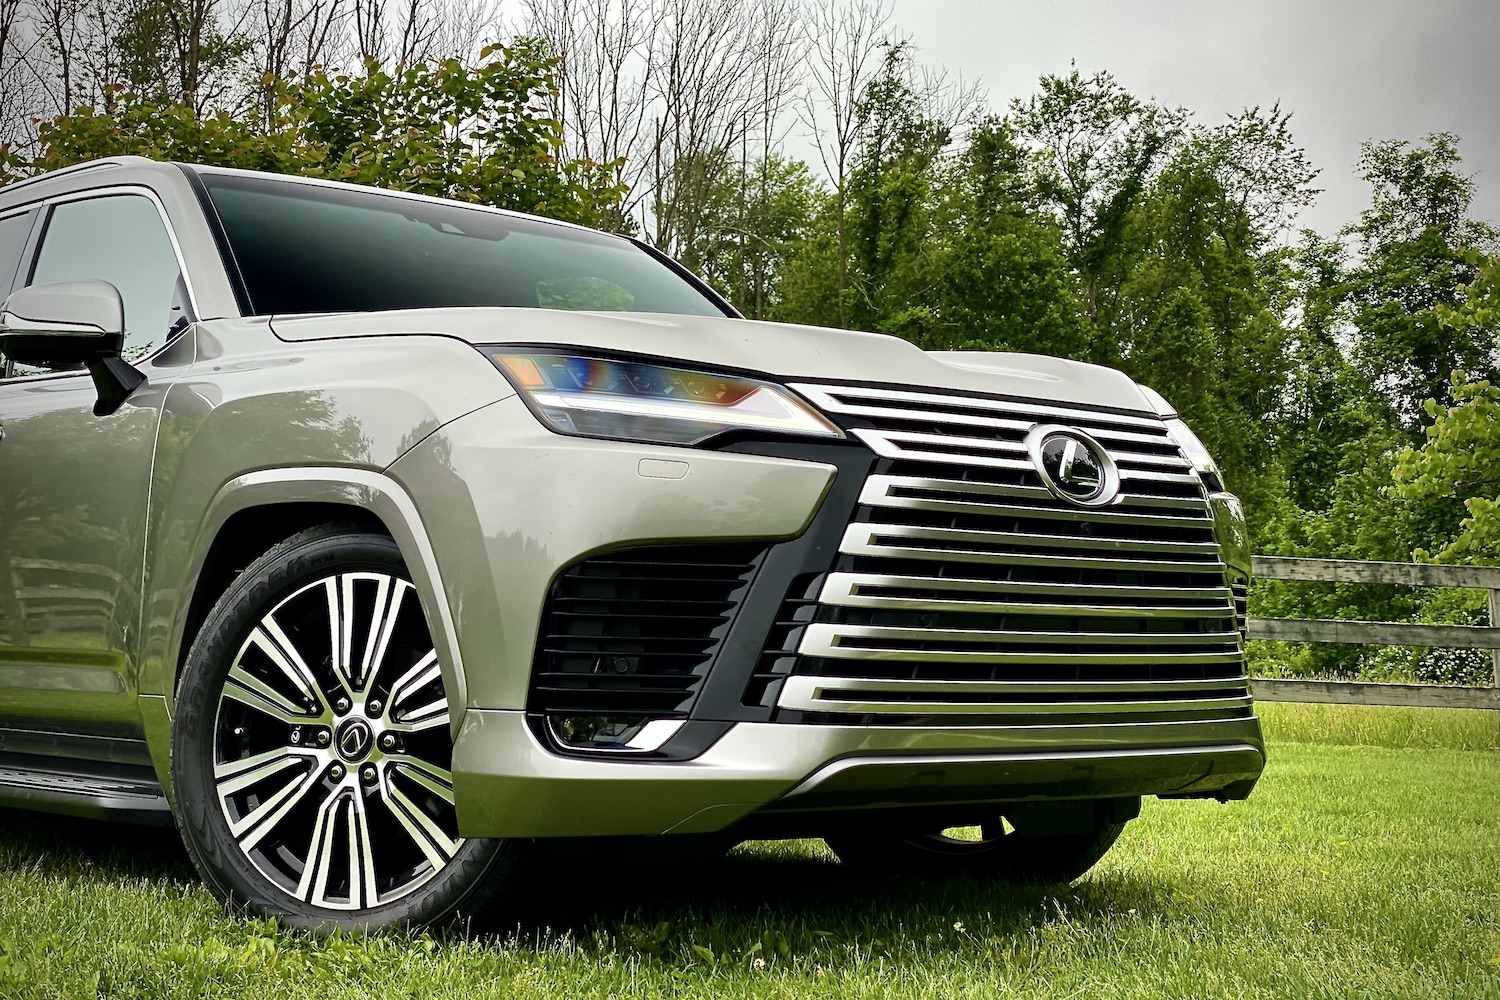 2022 Lexus LX 600 close up of front end with trees in the back on a grassy field.